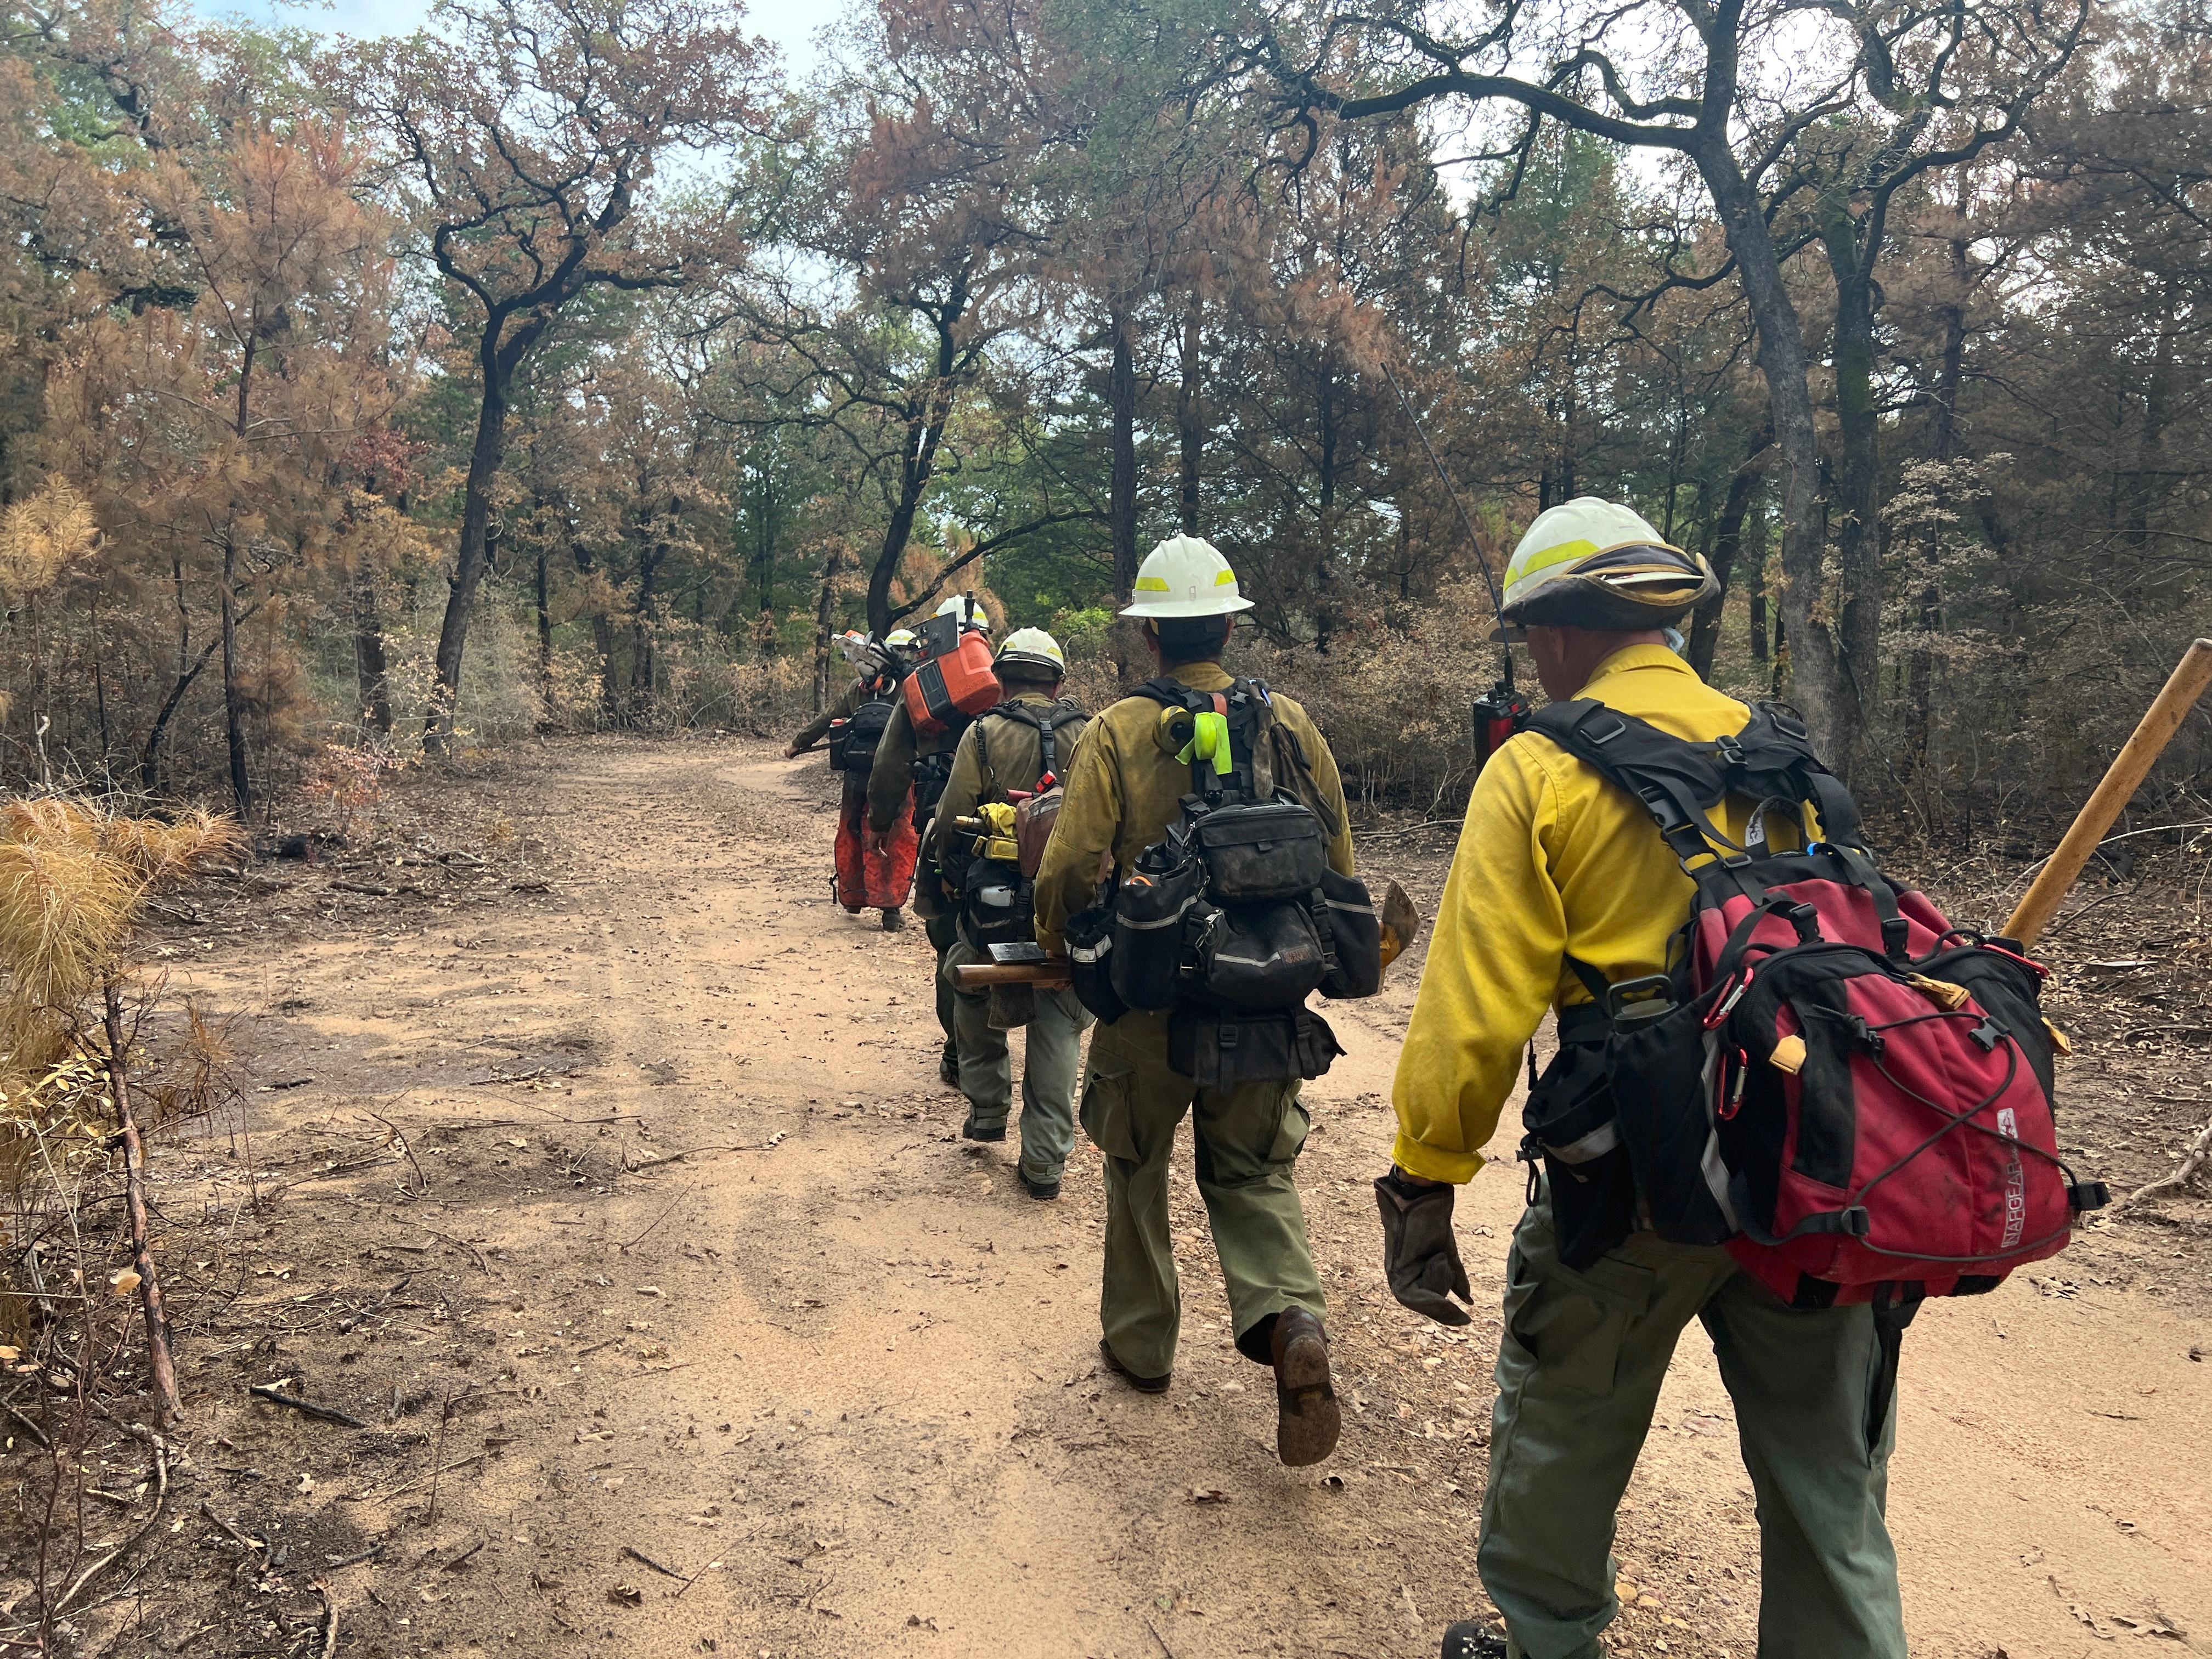 Firefighters walk in a single file line on a dirt path, surrounded by green trees